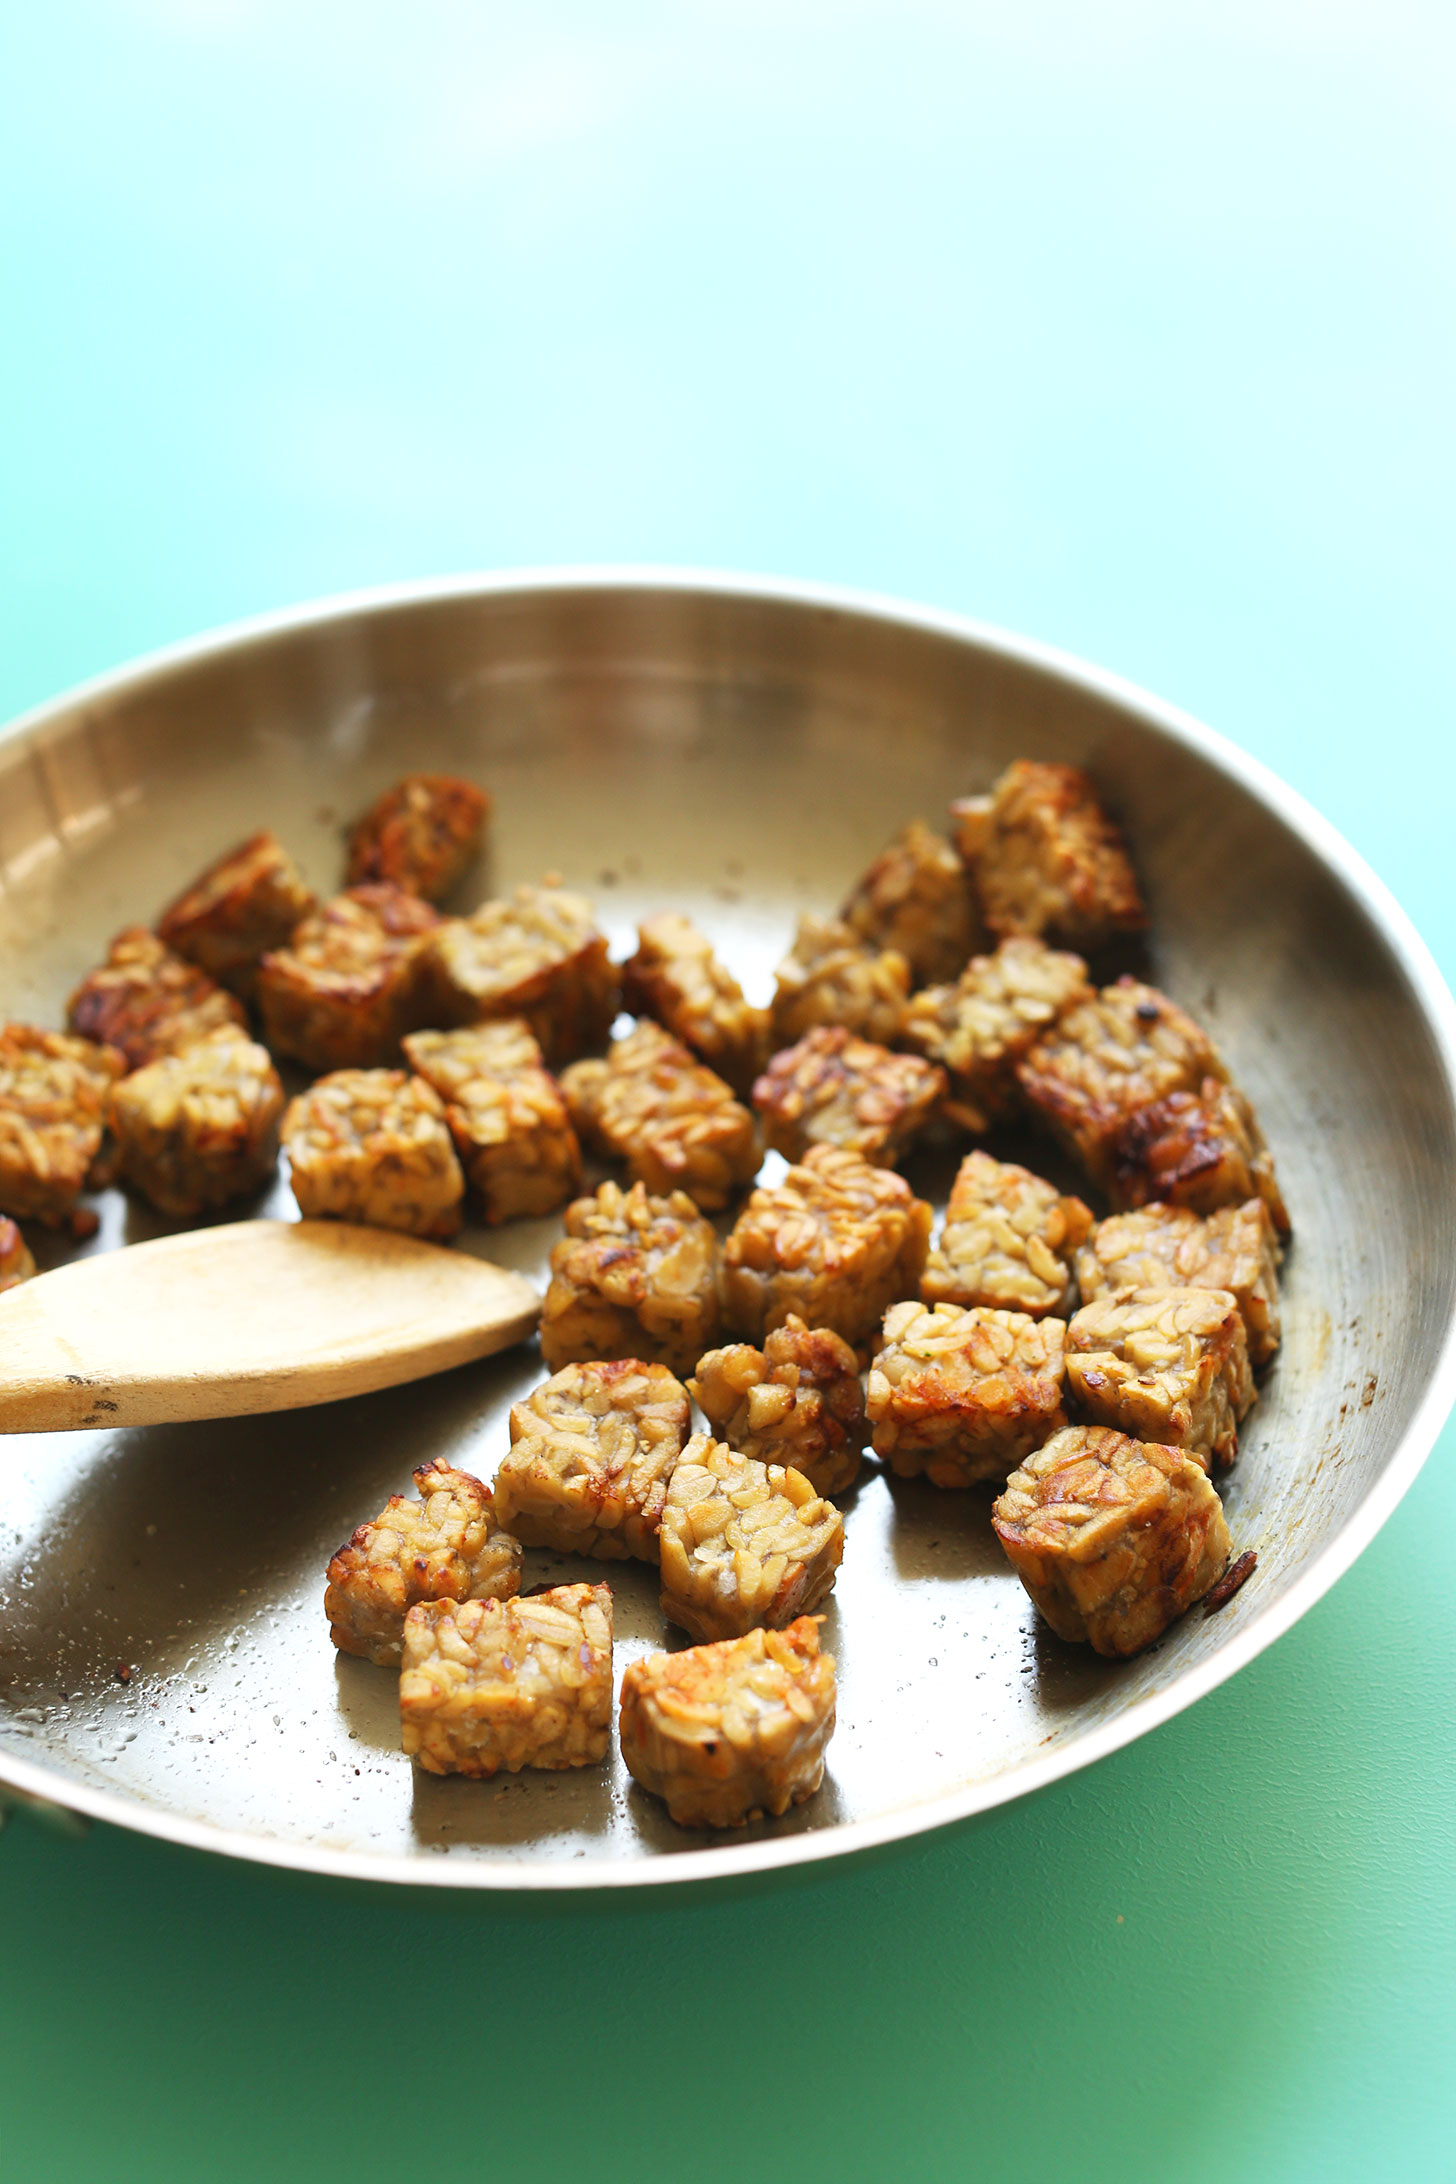 Cooking cubes of tempeh for our Smoky Tempeh Burrito Bowls recipe